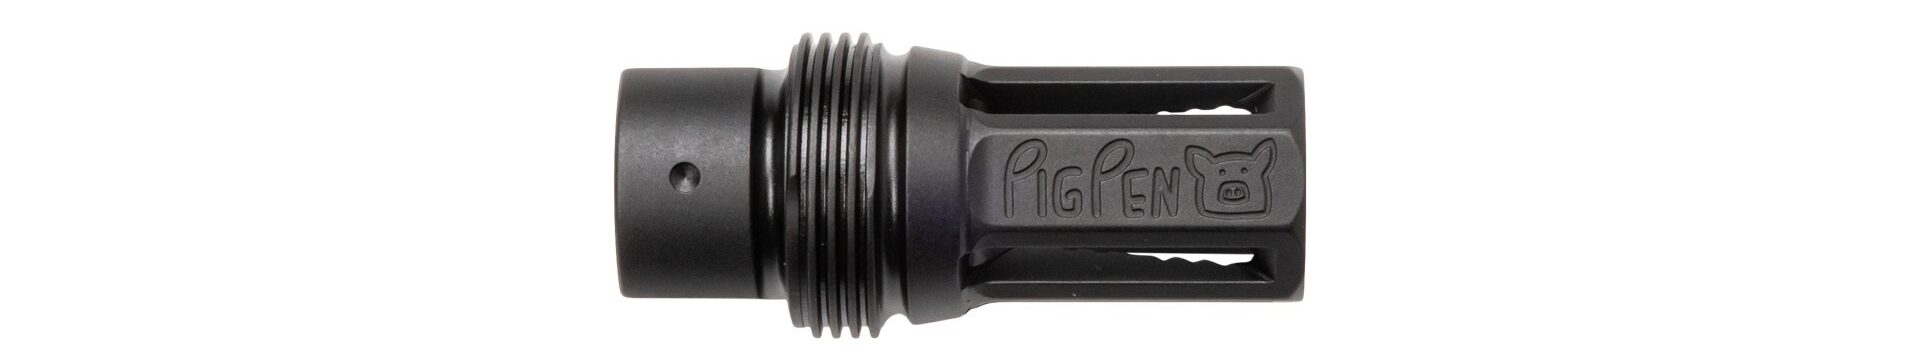 One Flash Hider to Rule Them All - The New Noveske Pig Pen